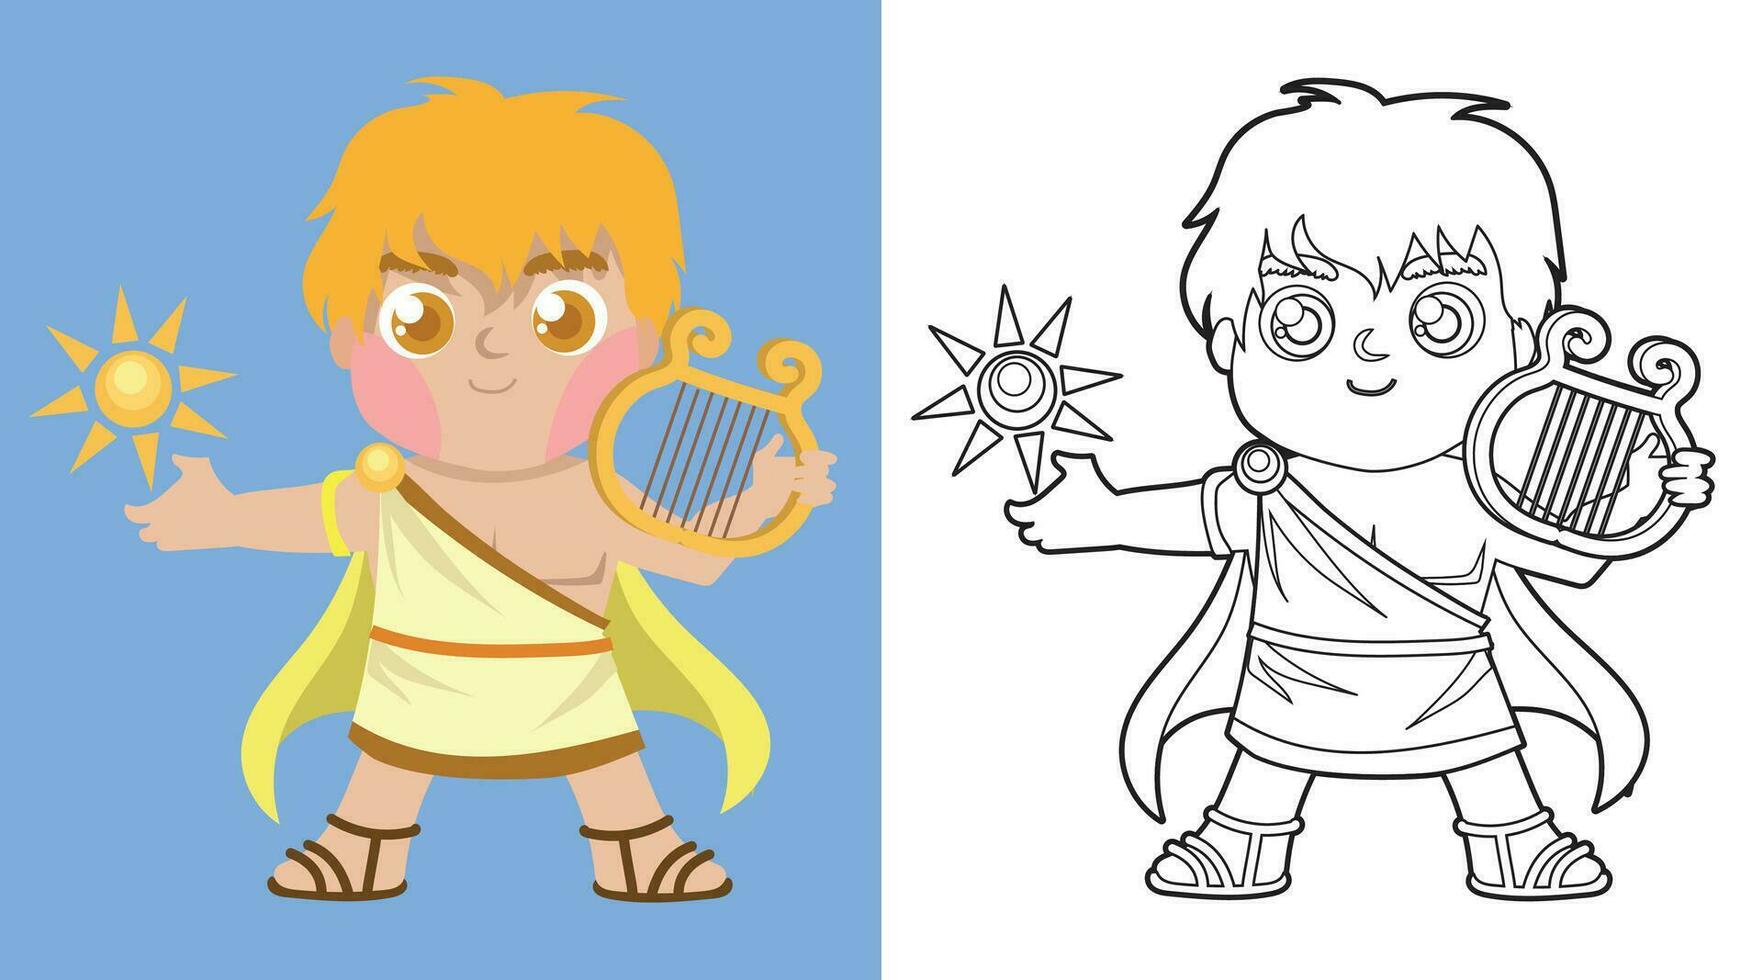 Colouring worksheet ancient Greece mythology. Greek deity theme elements. Coloring page activity for kids vector